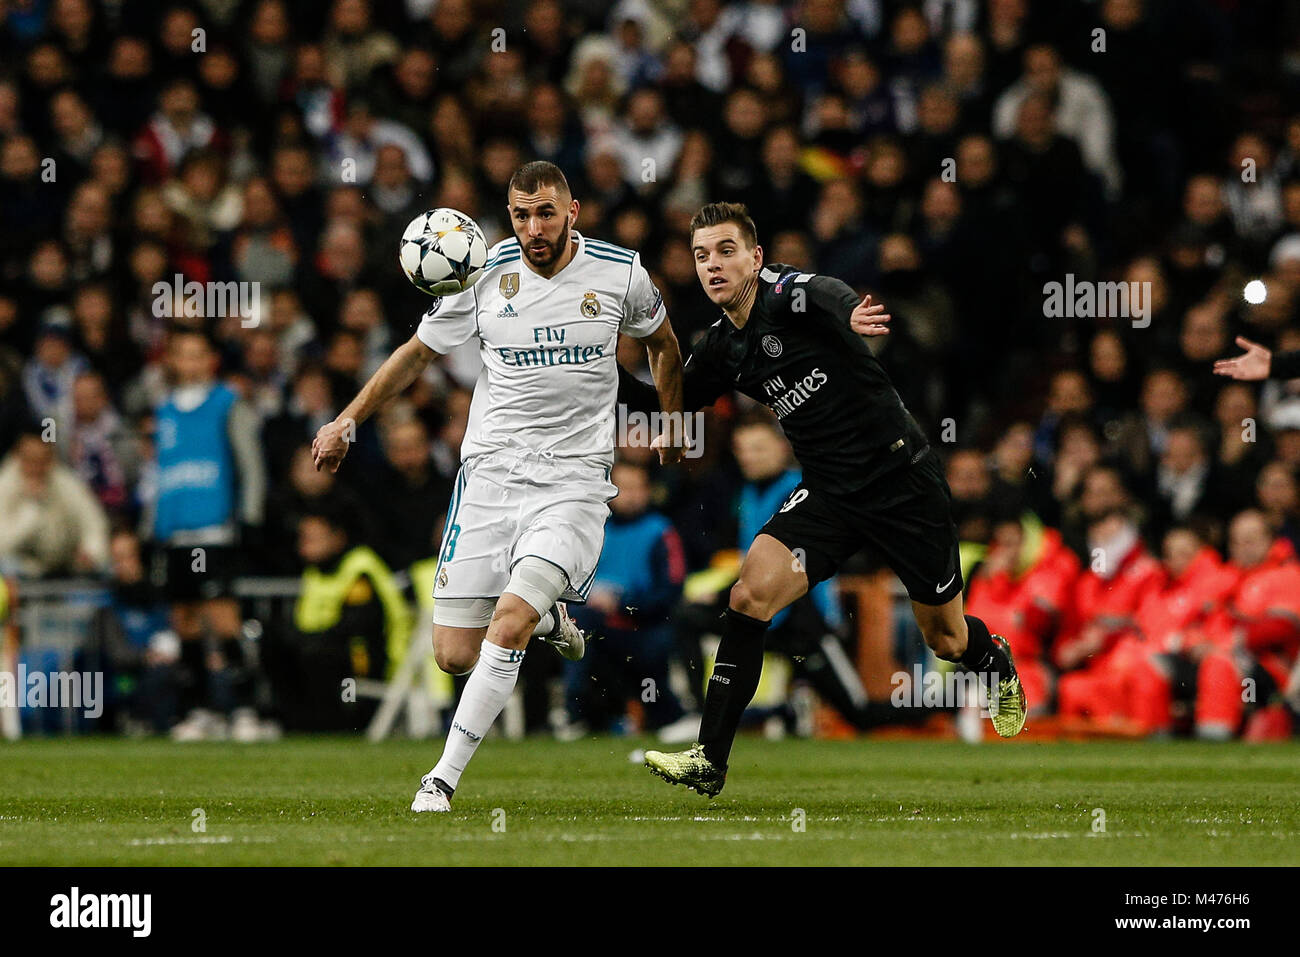 Karim Benzema (Real Madrid) fights for control of the ball with Giovani Lo Celso (PSG), UCL Champions League match between Real Madrid vs PSG at the Santiago Bernabeu stadium in Madrid, Spain, February 14, 2018. Credit: Gtres Información más Comuniación on line, S.L./Alamy Live News Stock Photo